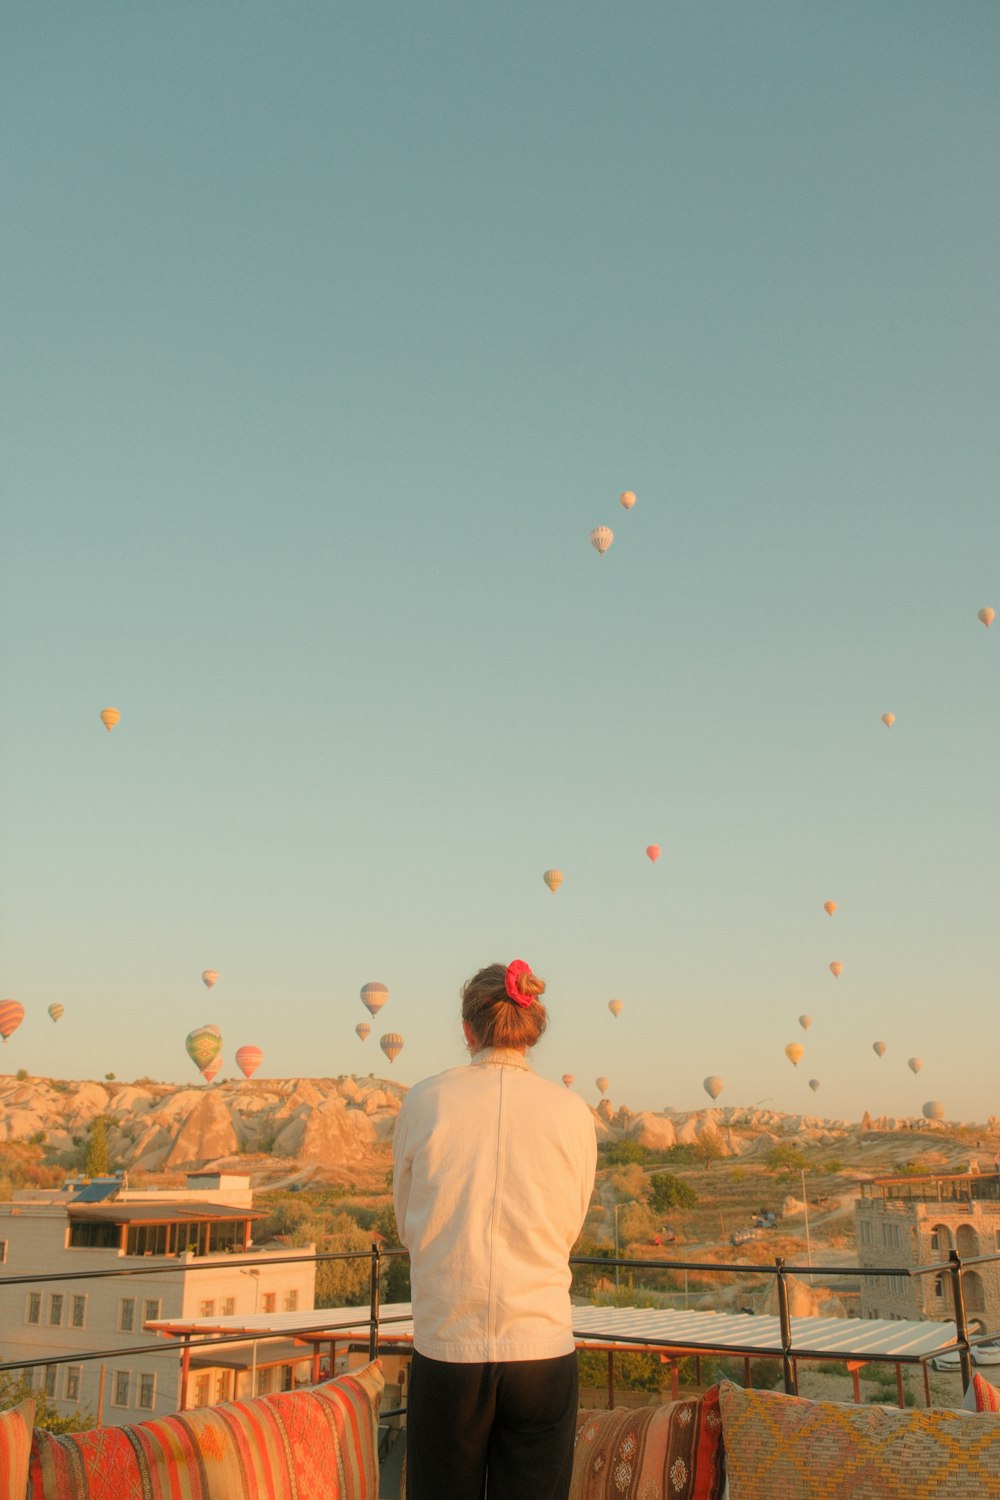 a woman standing on top of a roof watching hot air balloons